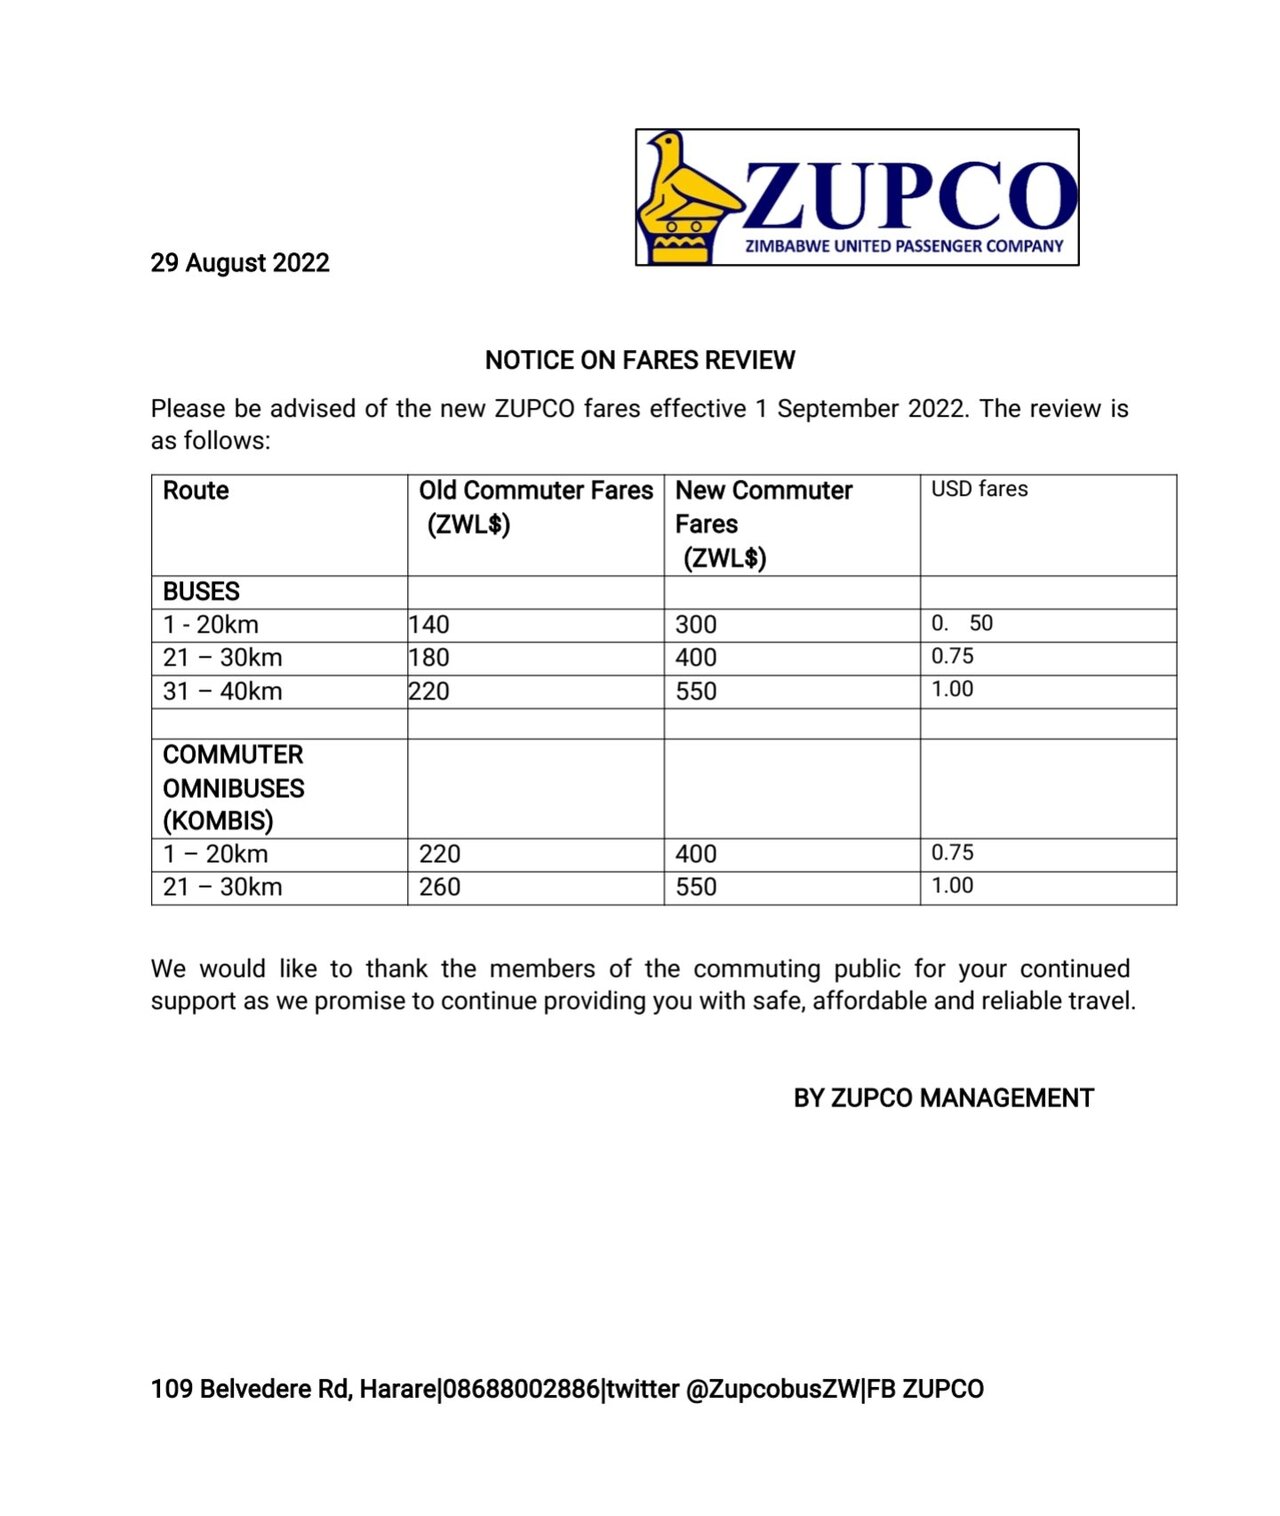 ZUPCO Hikes Fares & Introduces USD Prices With Effect From 1 September